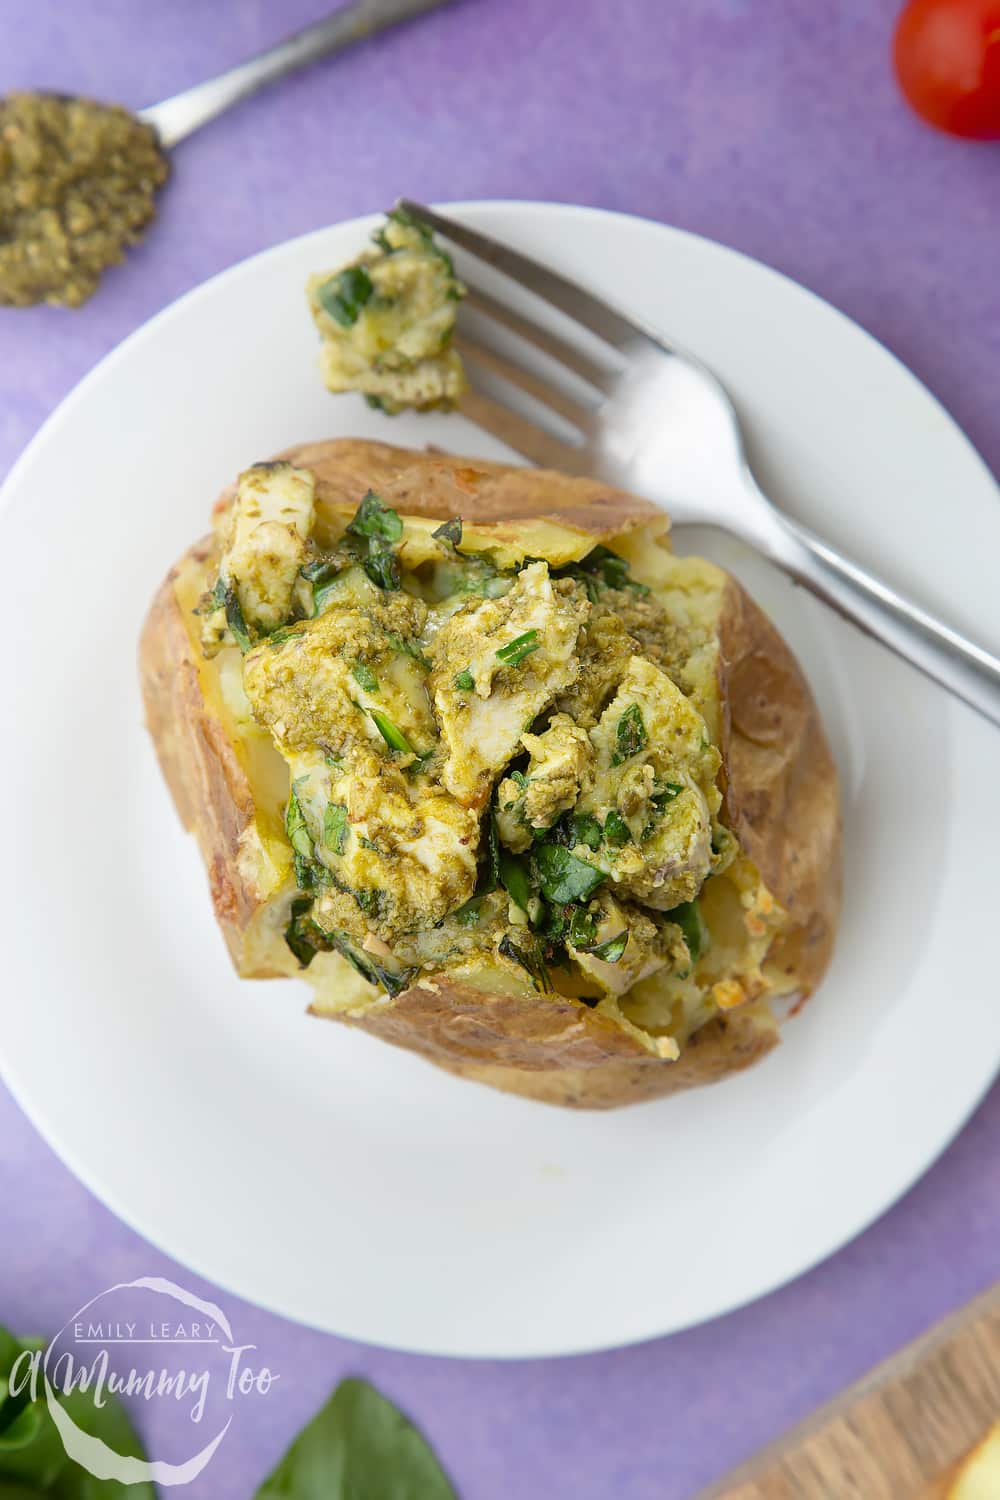 Jacket potato with cheesy pesto chicken on a white plate. The potato is piled high with a pesto, spinach cheese and chicken mix. A fork rests to the side.